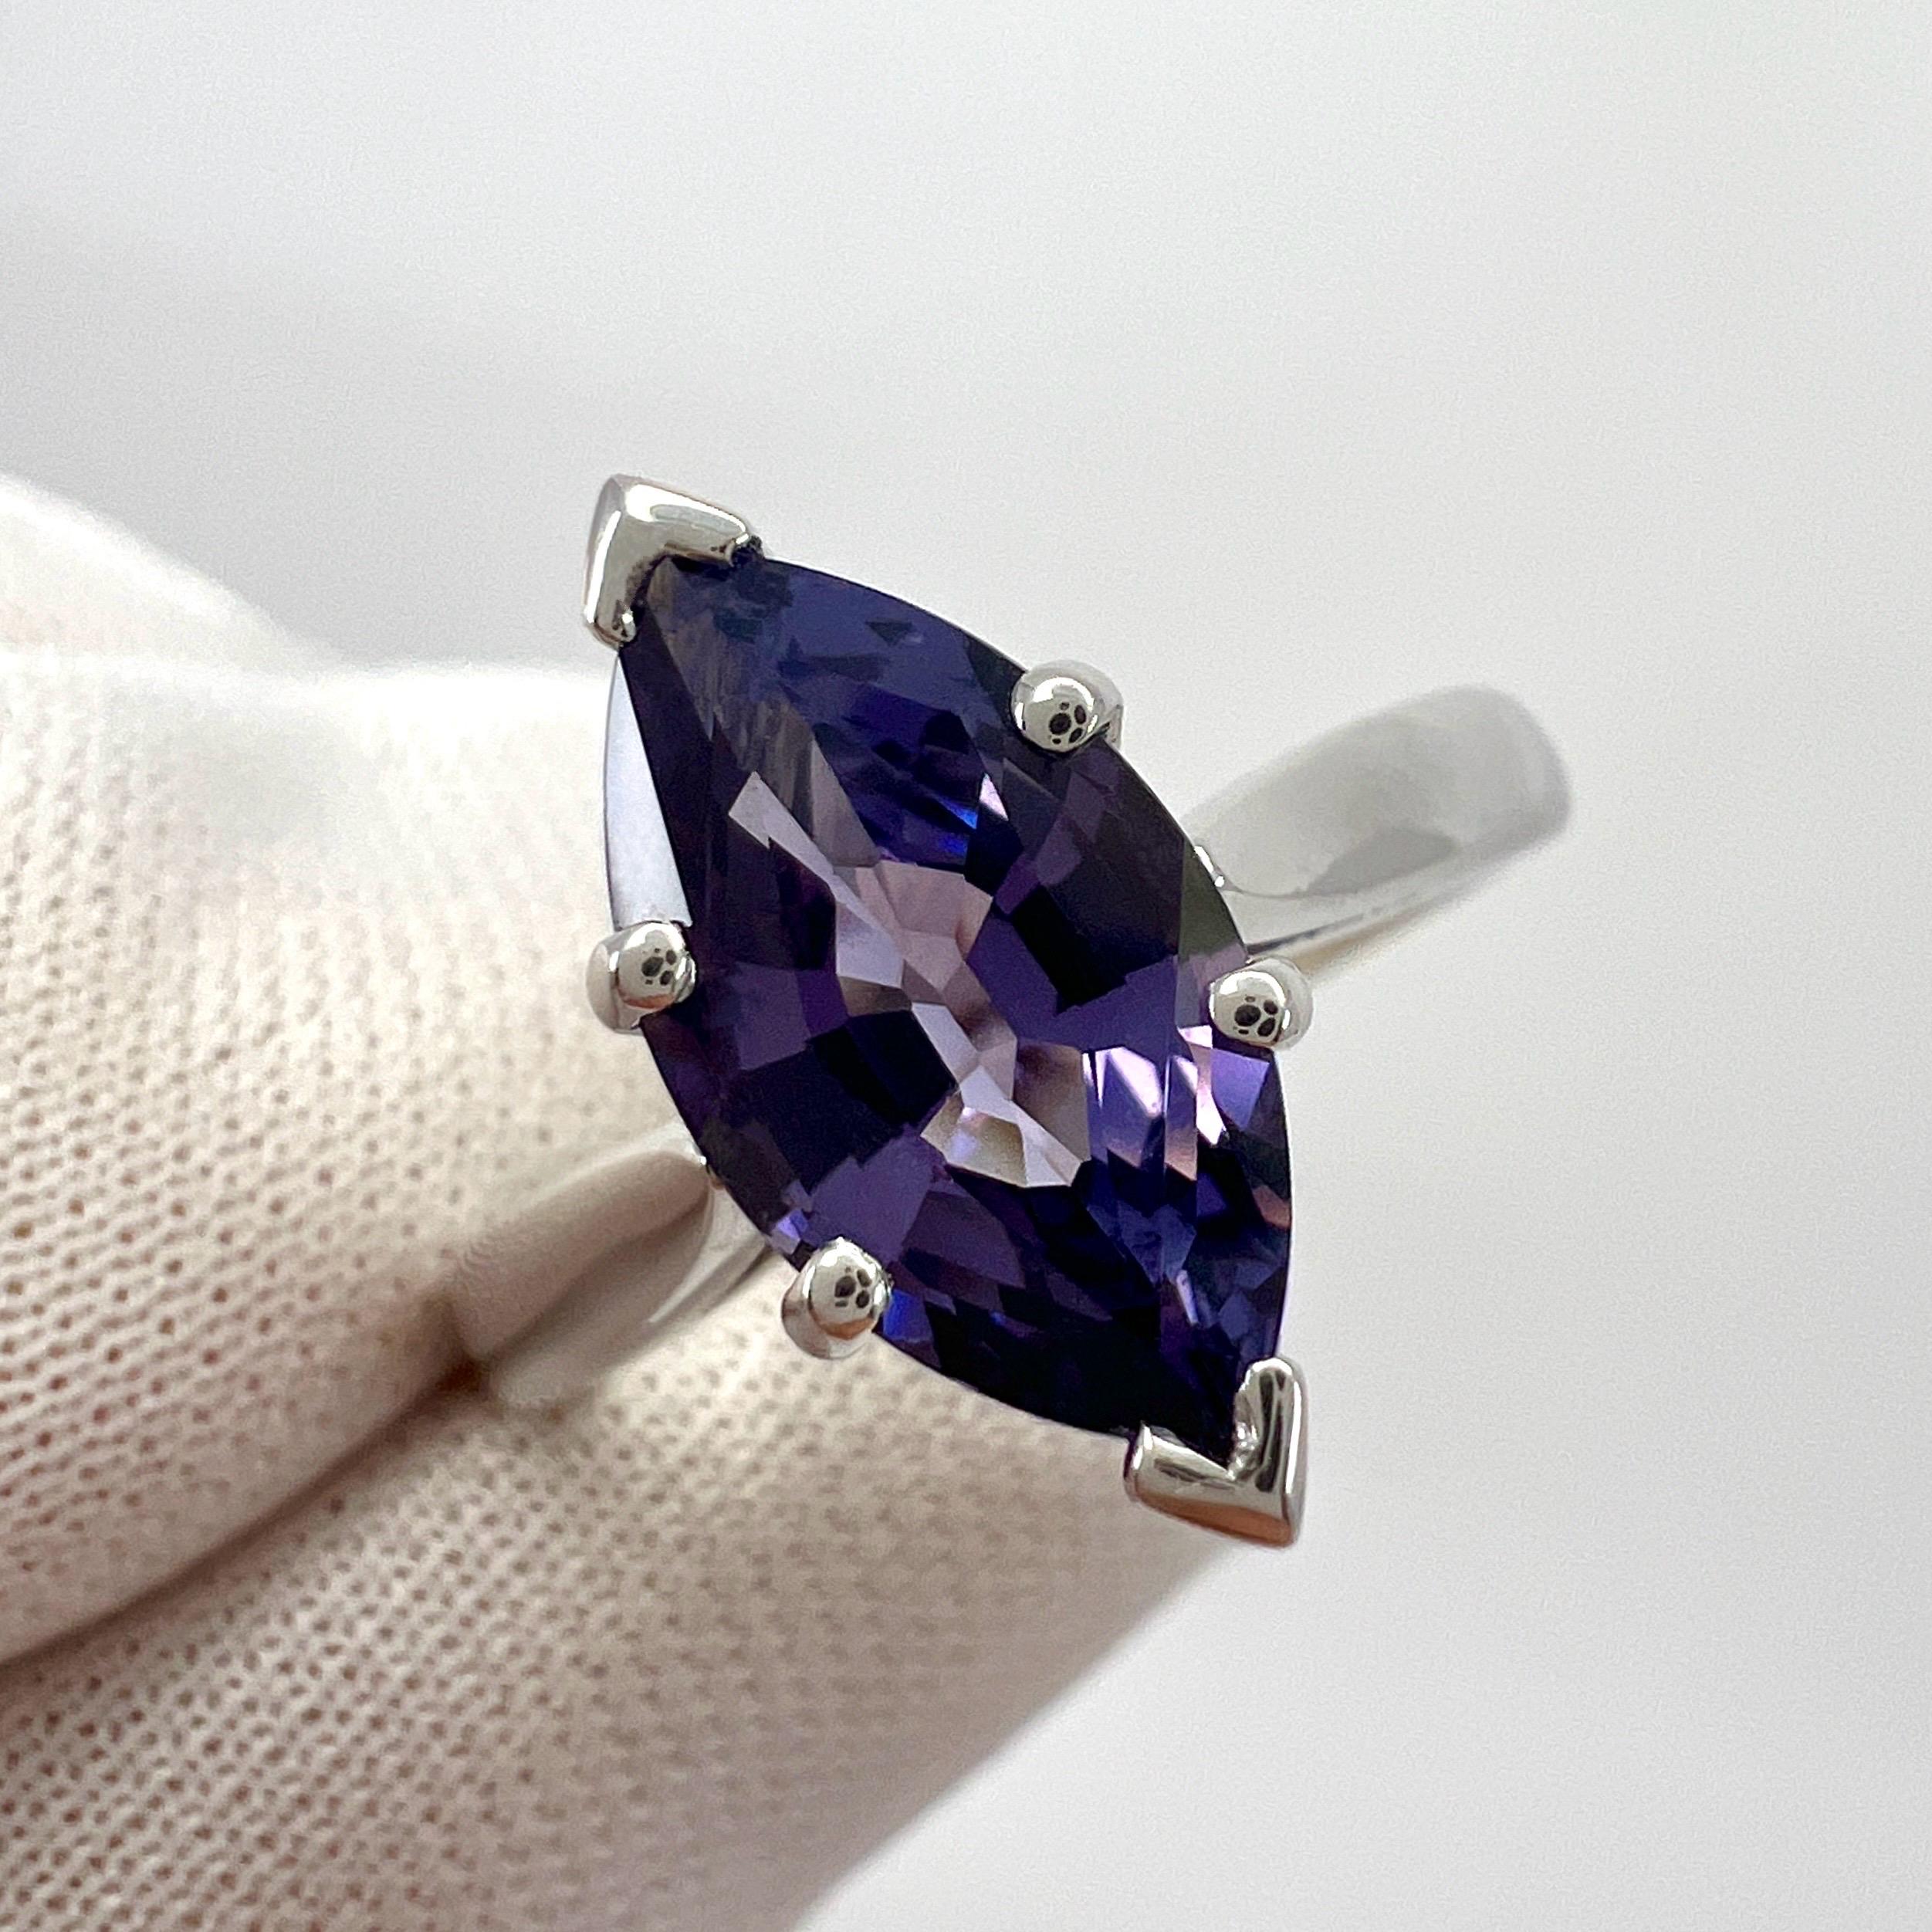 Marquise Cut Unique 2.13ct Vivid Purple Violet Spinel Marquise 18k White Gold Solitaire Ring For Sale